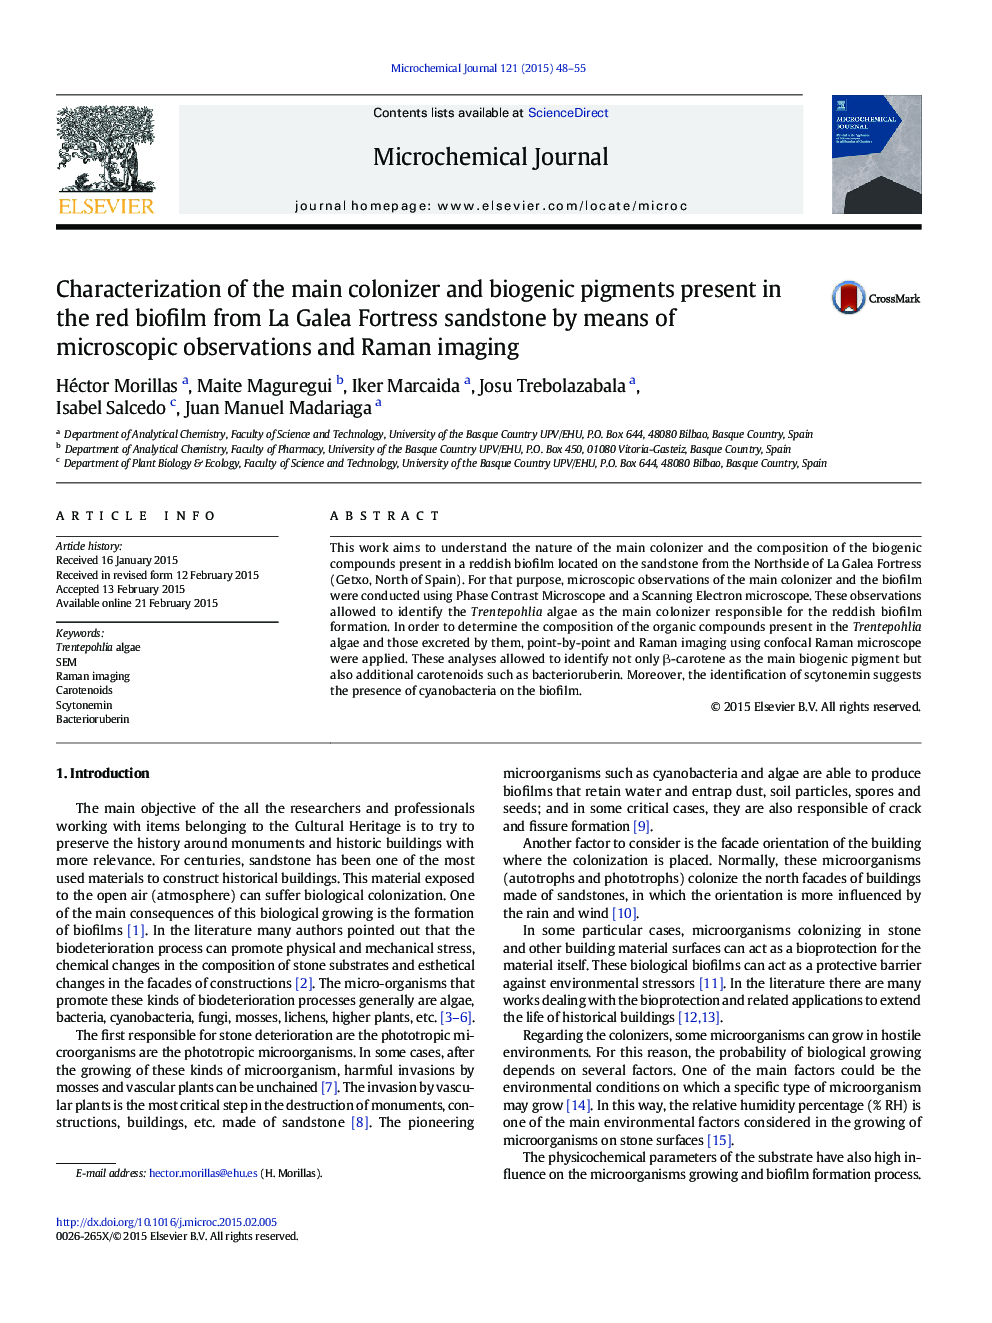 Characterization of the main colonizer and biogenic pigments present in the red biofilm from La Galea Fortress sandstone by means of microscopic observations and Raman imaging